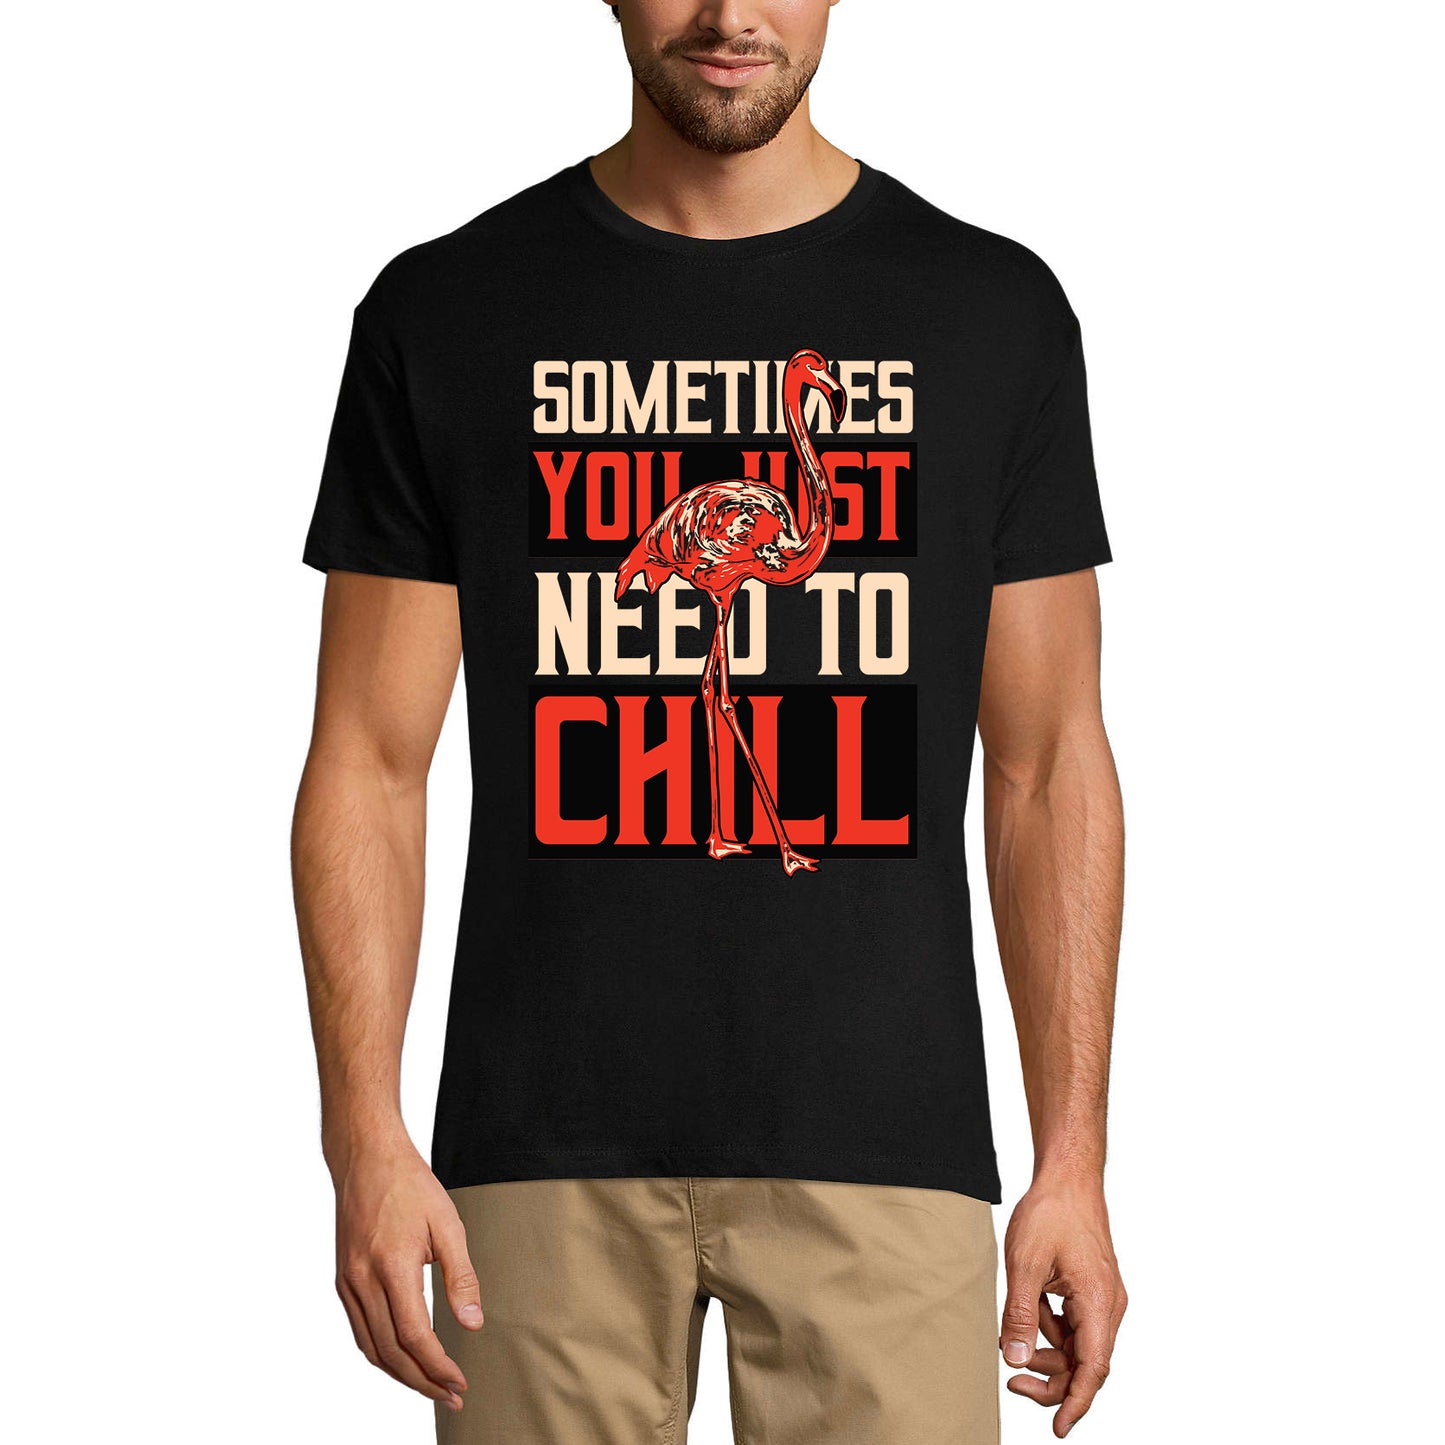 ULTRABASIC Men's T-Shirt Sometimes You Just Need to Chill - Funny Flamingo Shirt